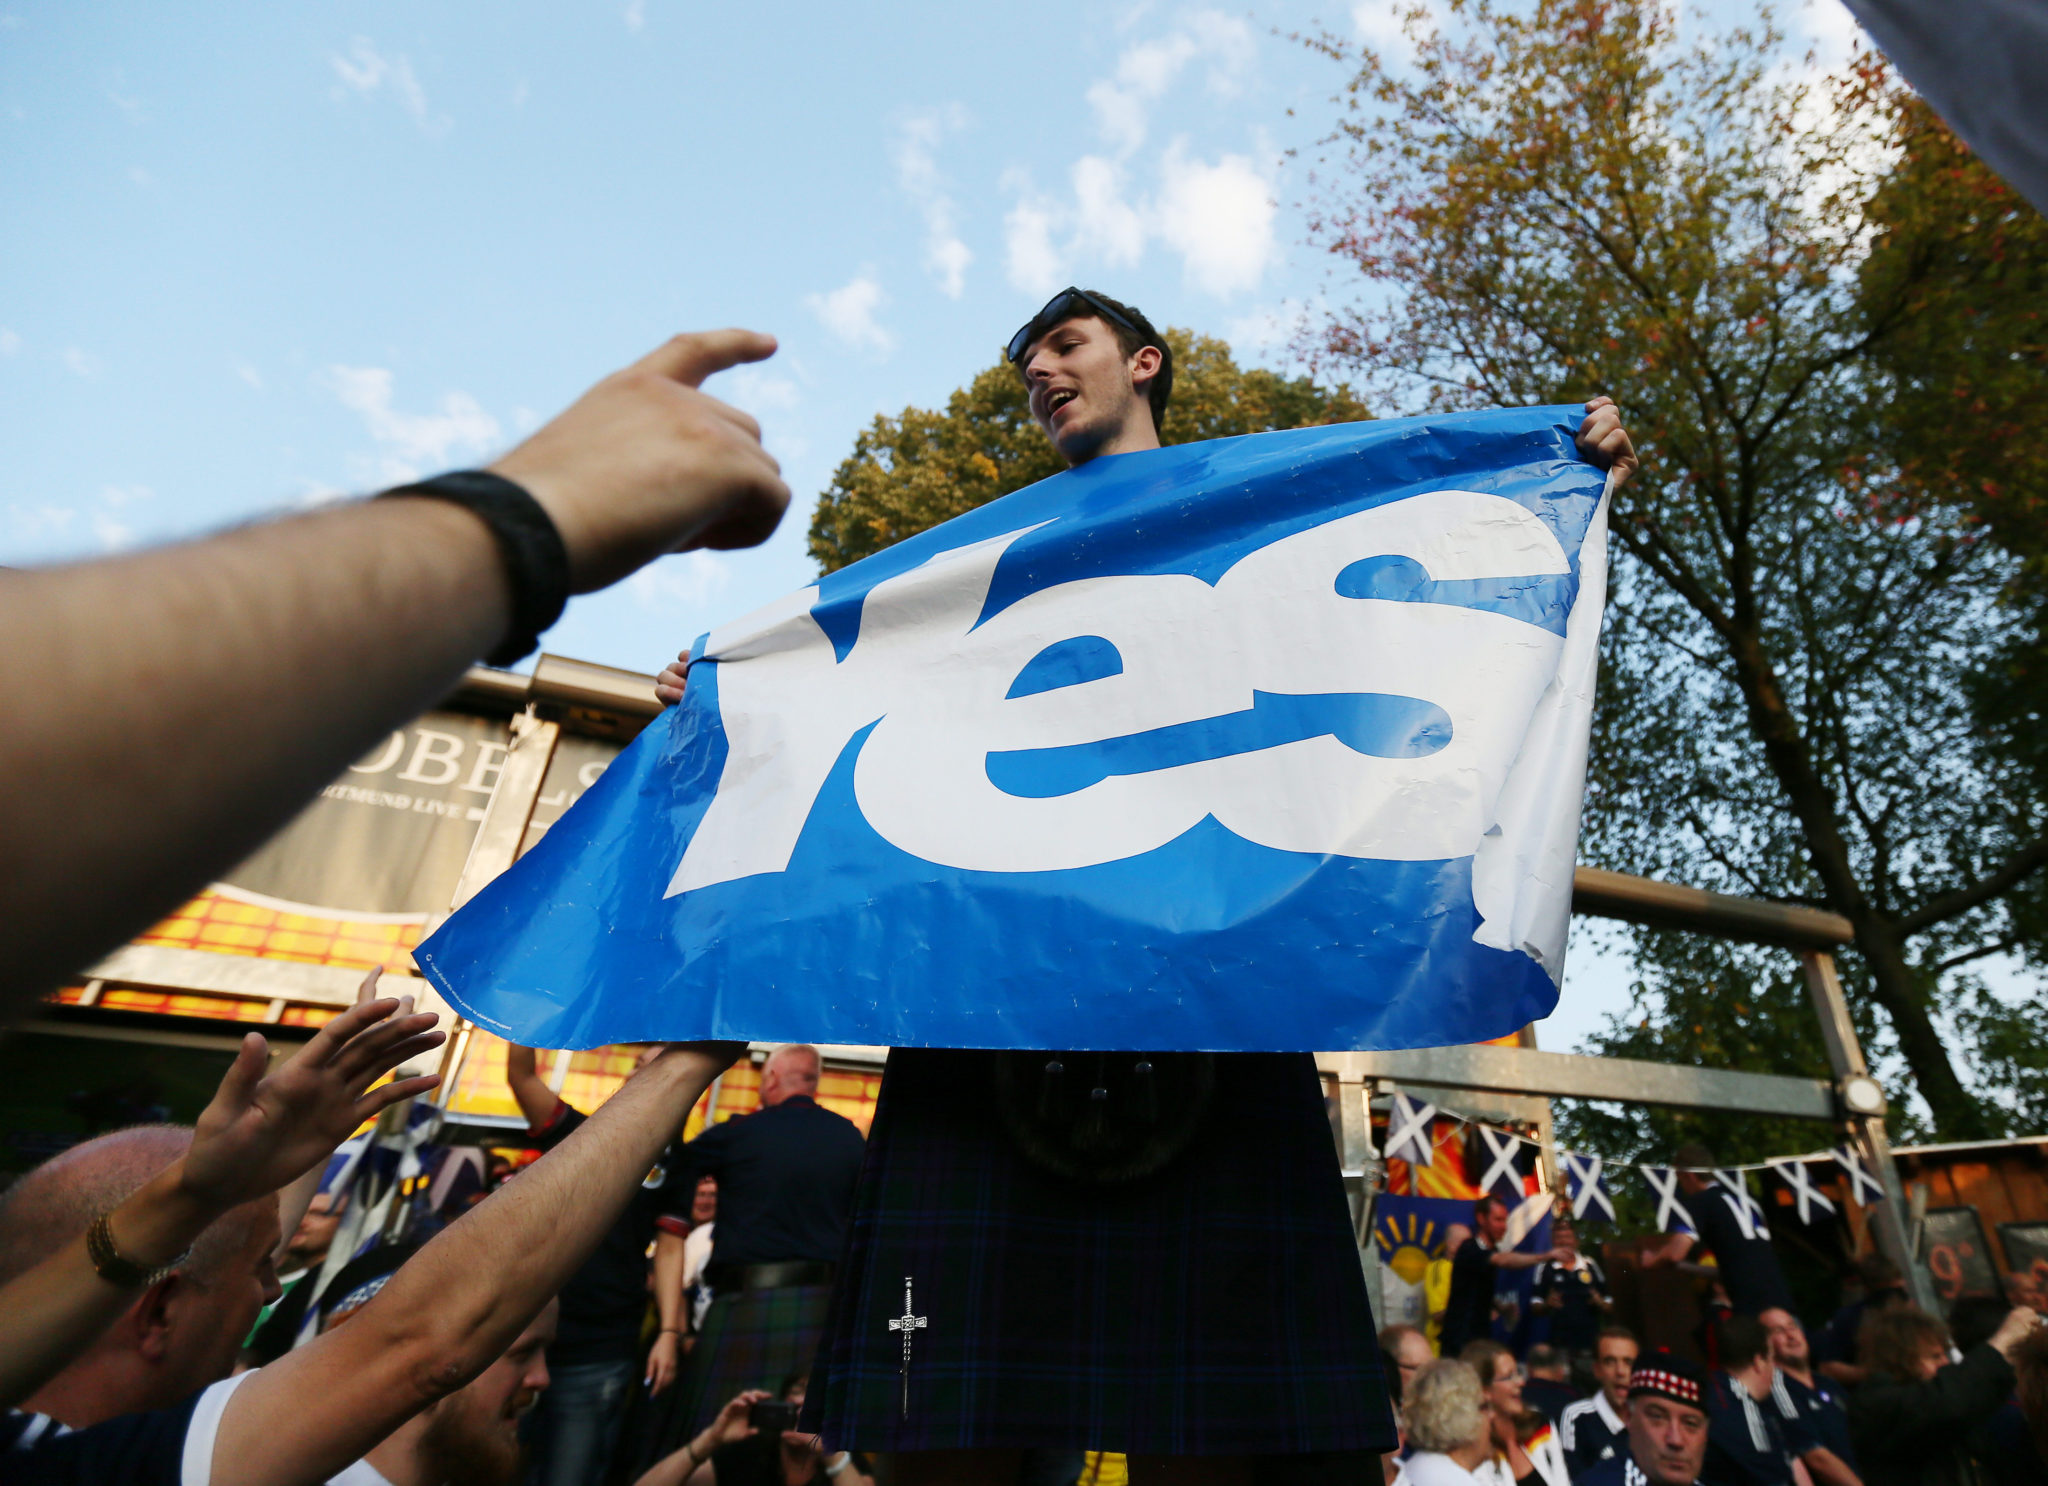 Scotland fans make their feelings known about independence at a Euro Qualifier in Germany in September 2014.